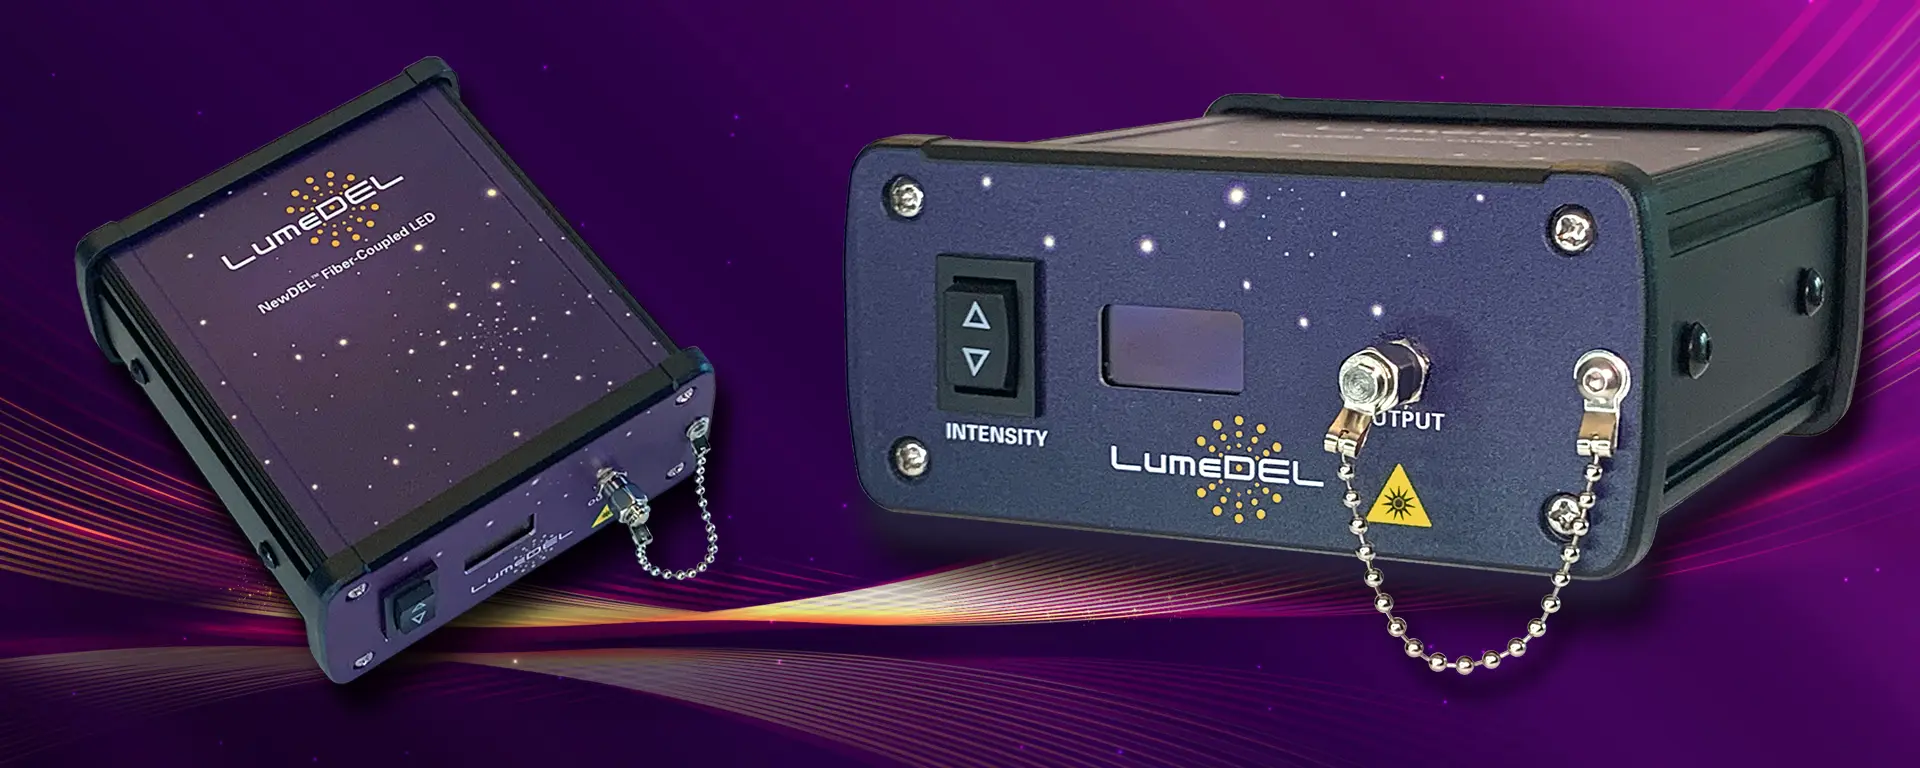 LumeDEL angled product views